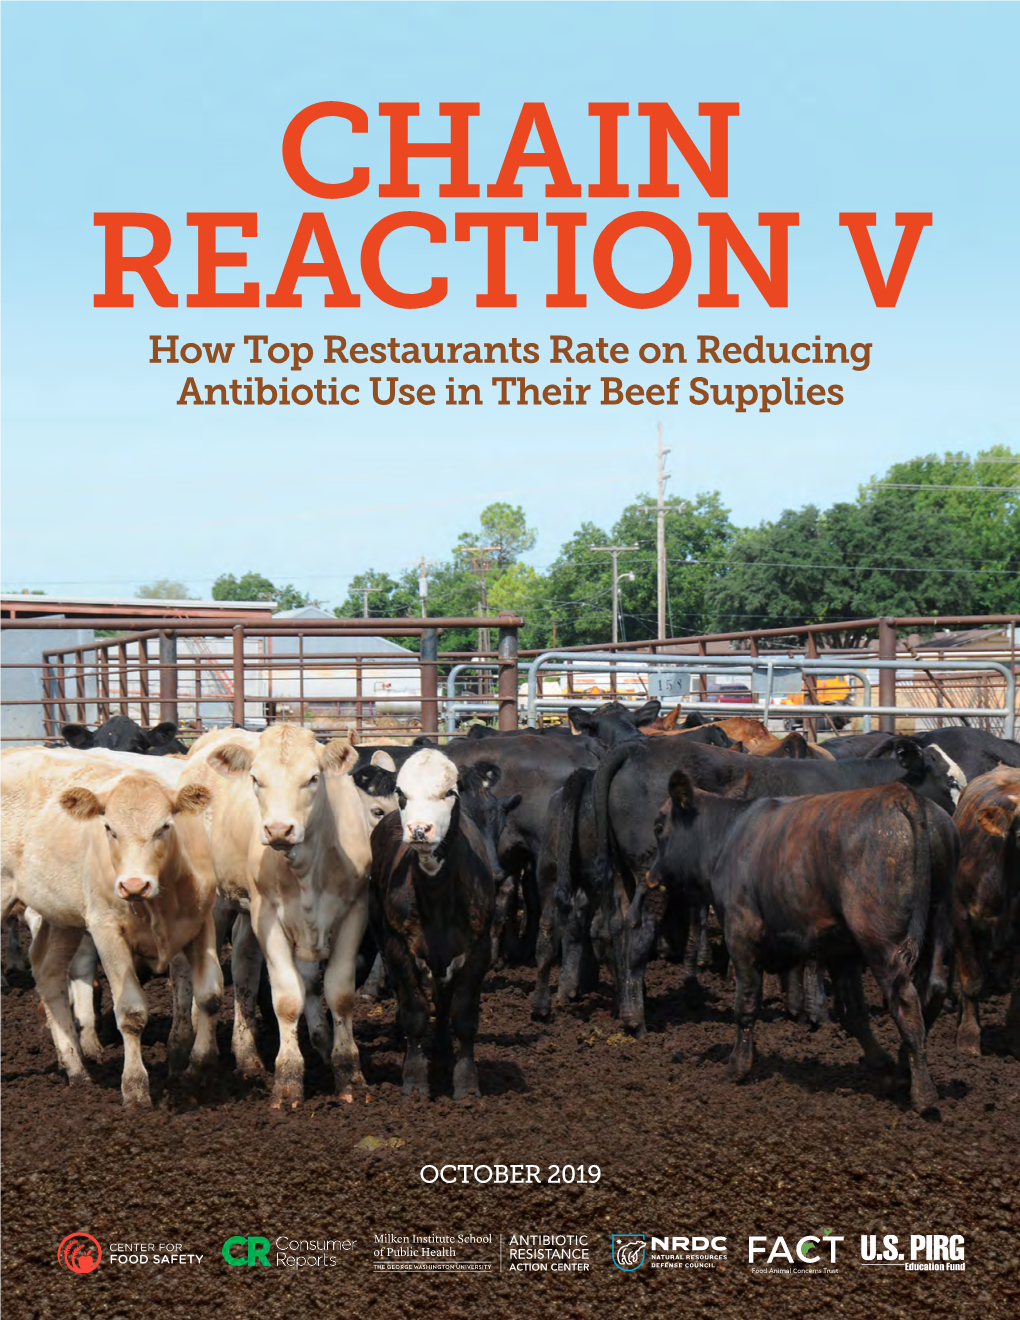 How Top Restaurants Rate on Reducing Antibiotic Use in Their Beef Supplies